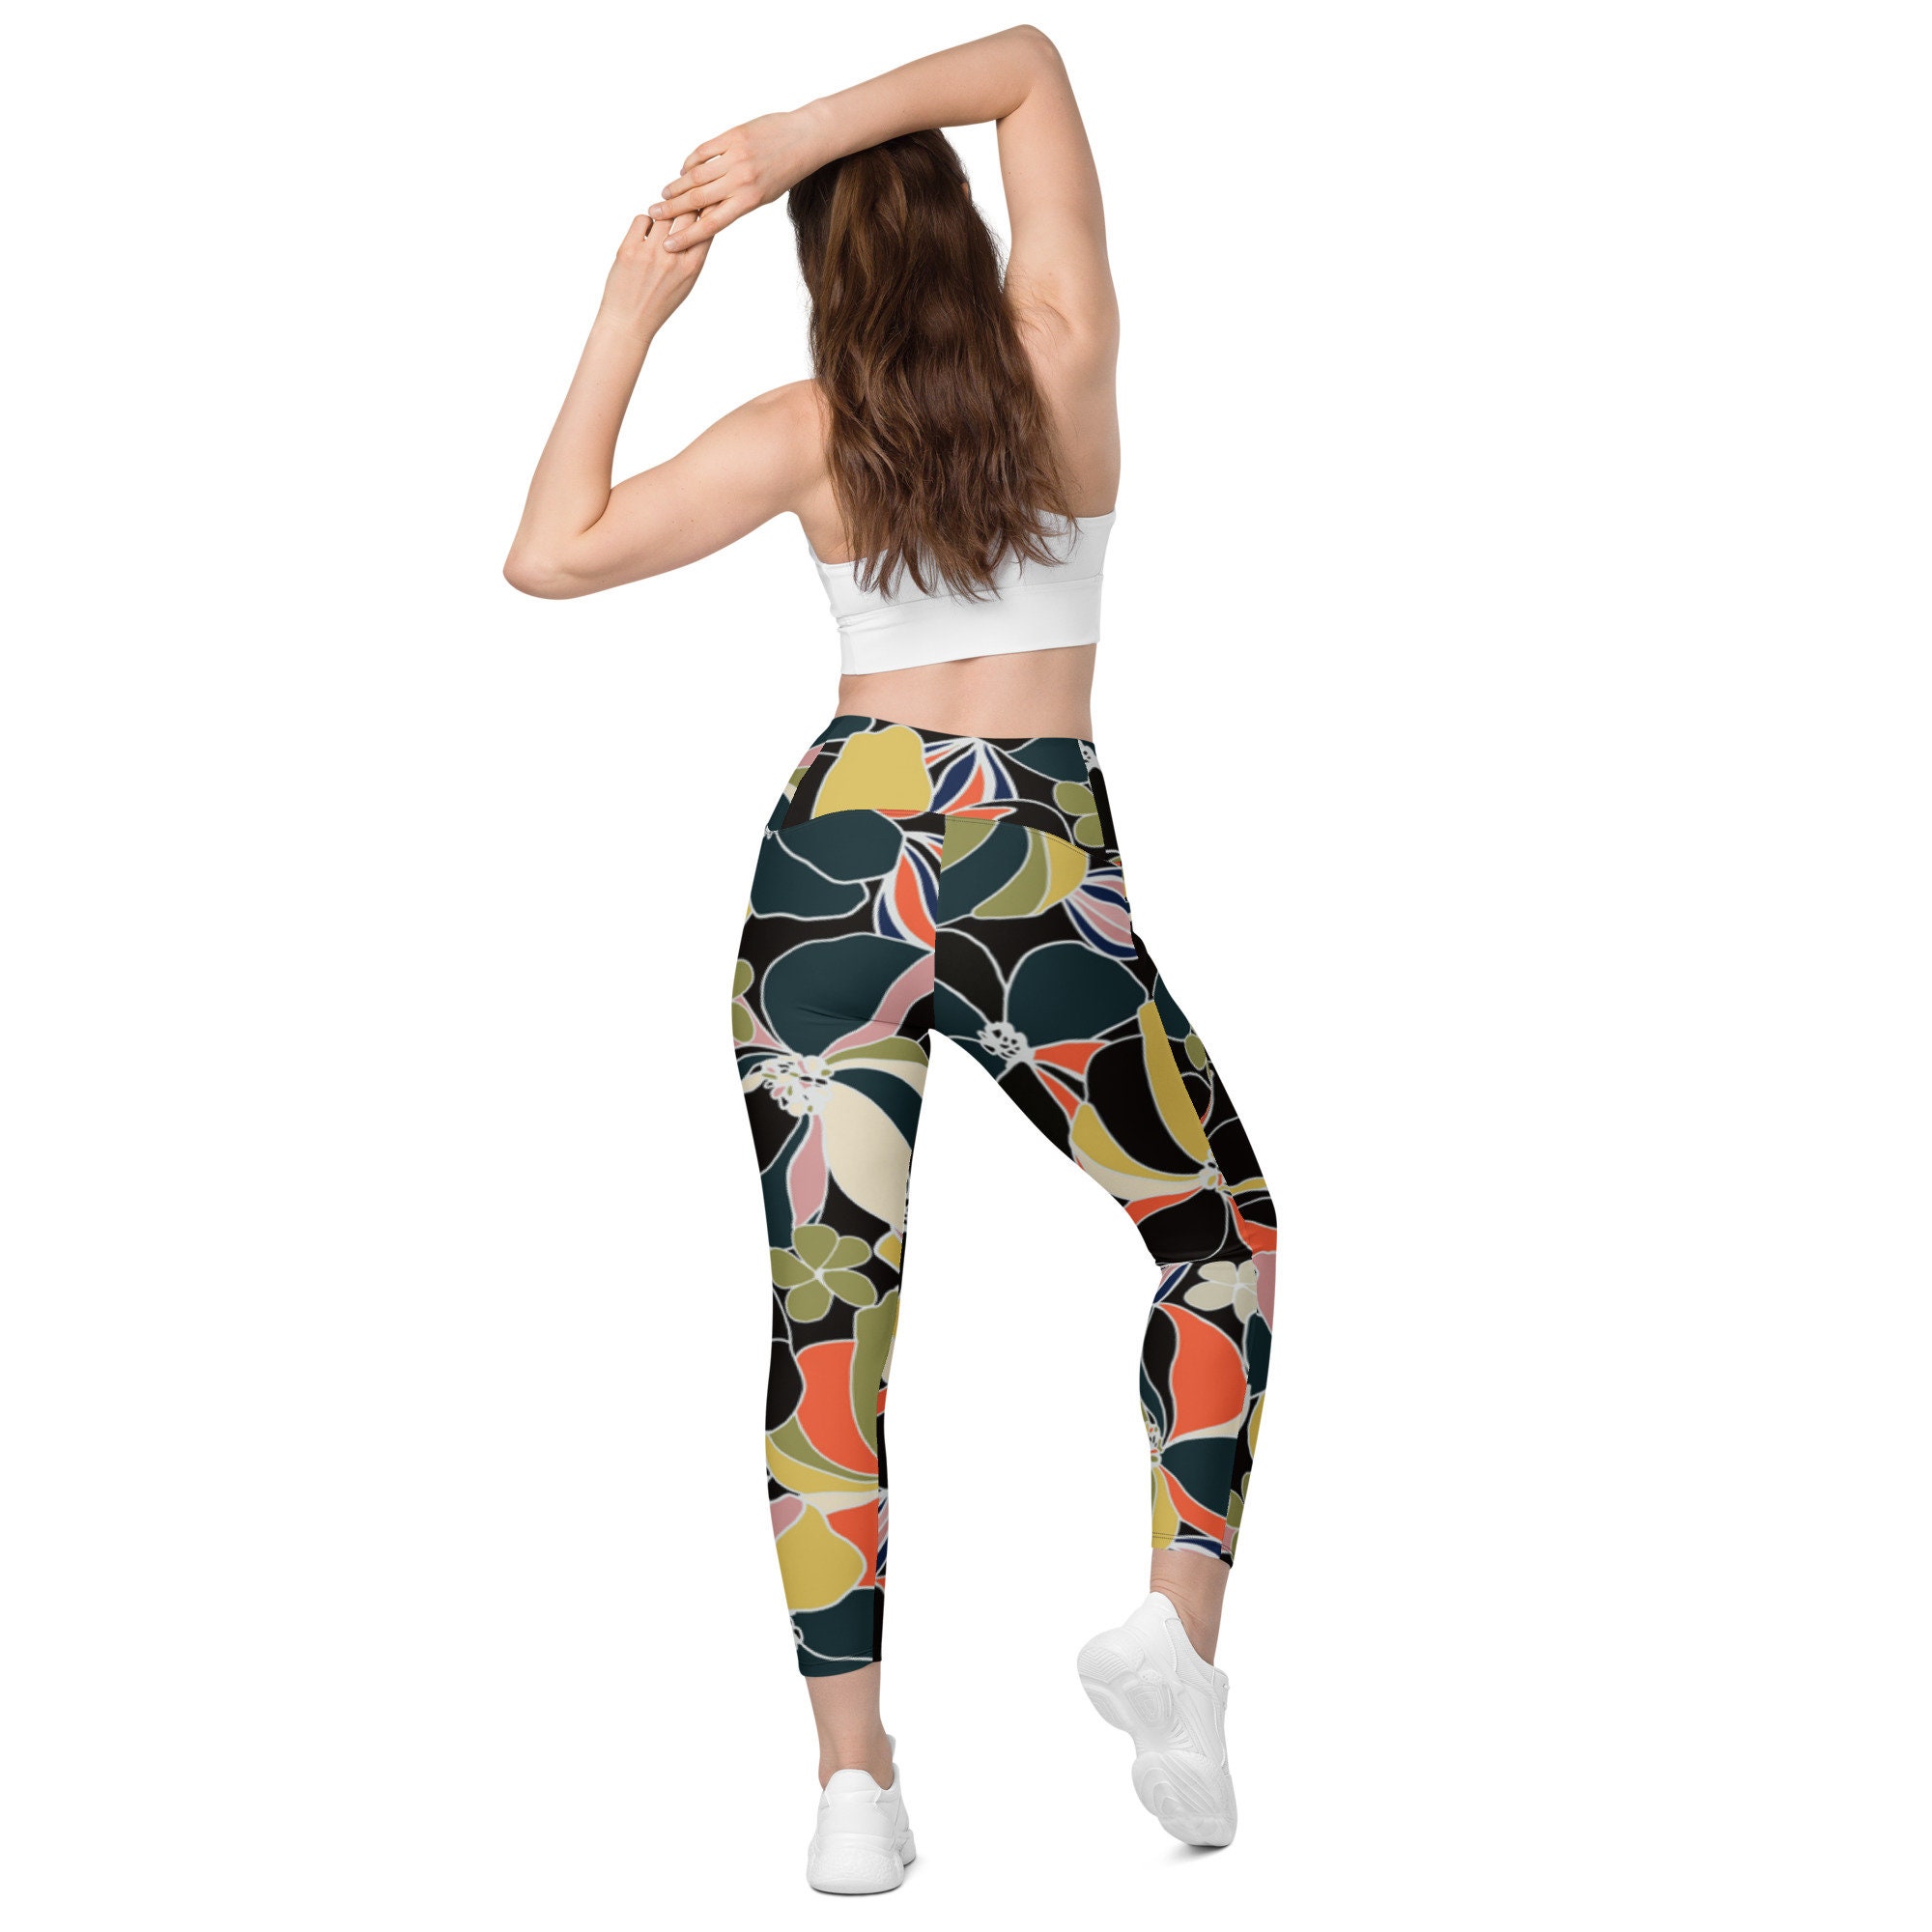 60's Inspired Crossover leggings with pockets